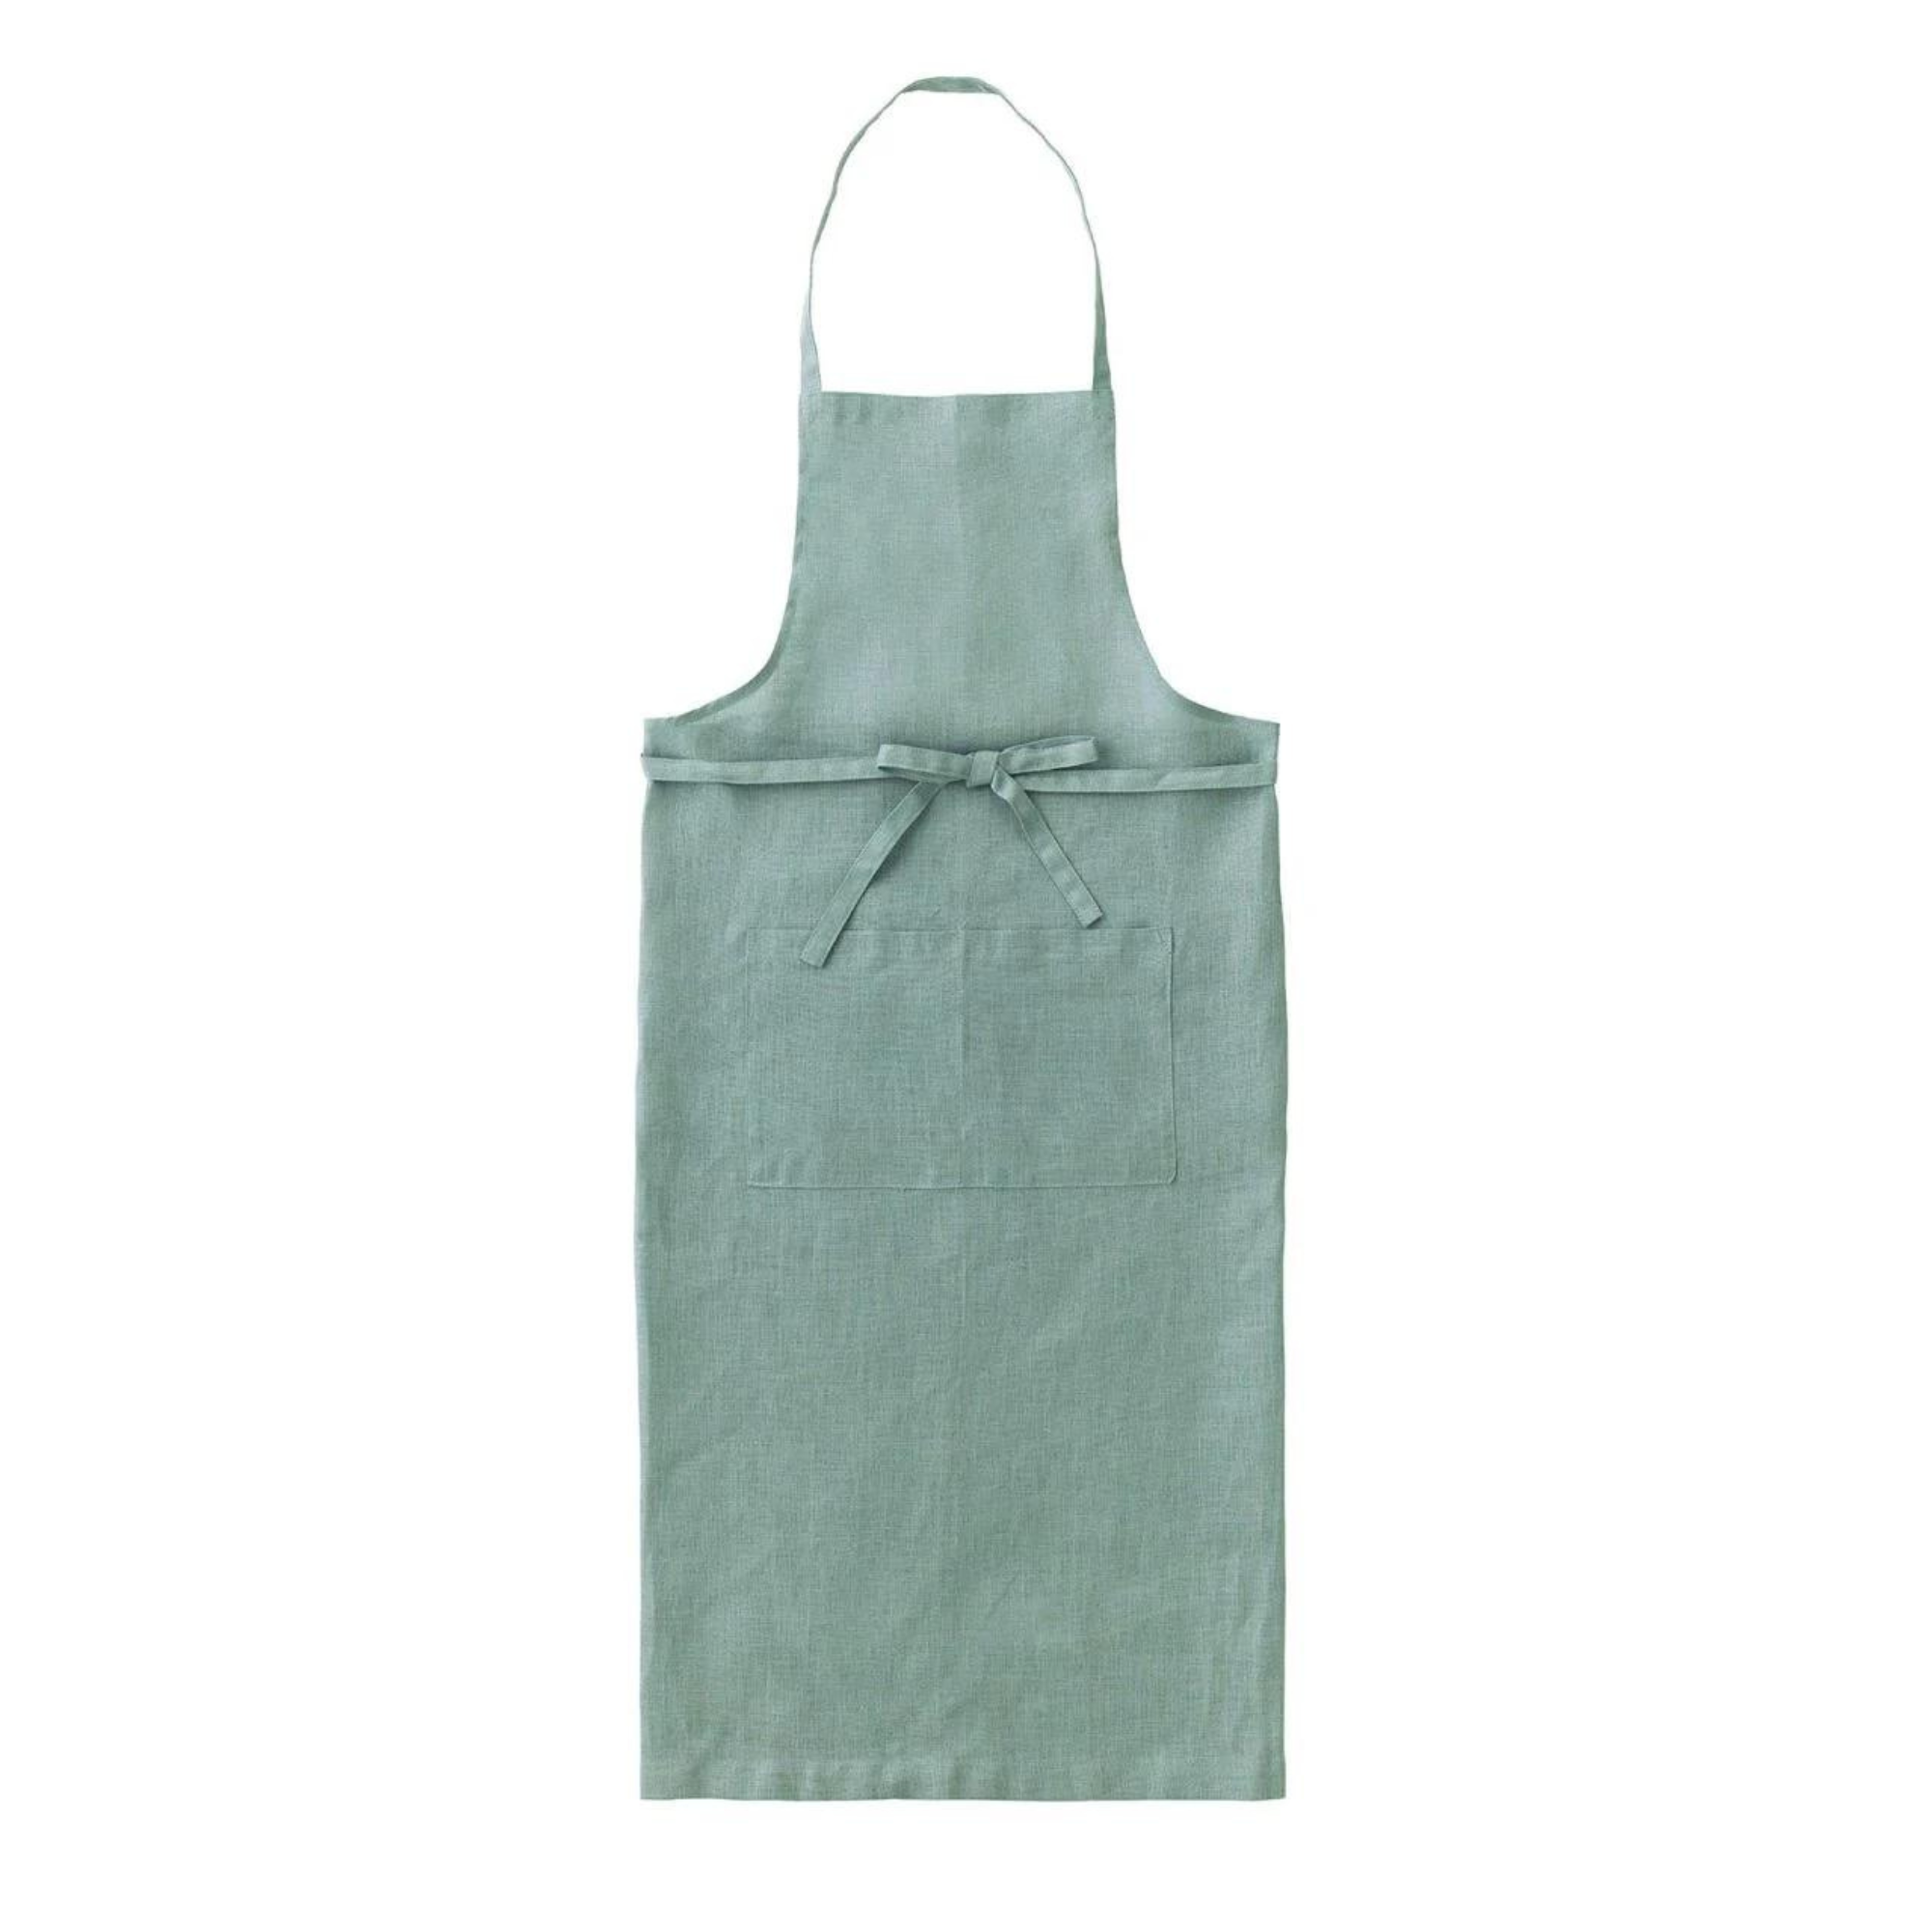 Crafted from durable linen fabric, this light green apron features two front pockets, making it ideal for kitchen or craft use.